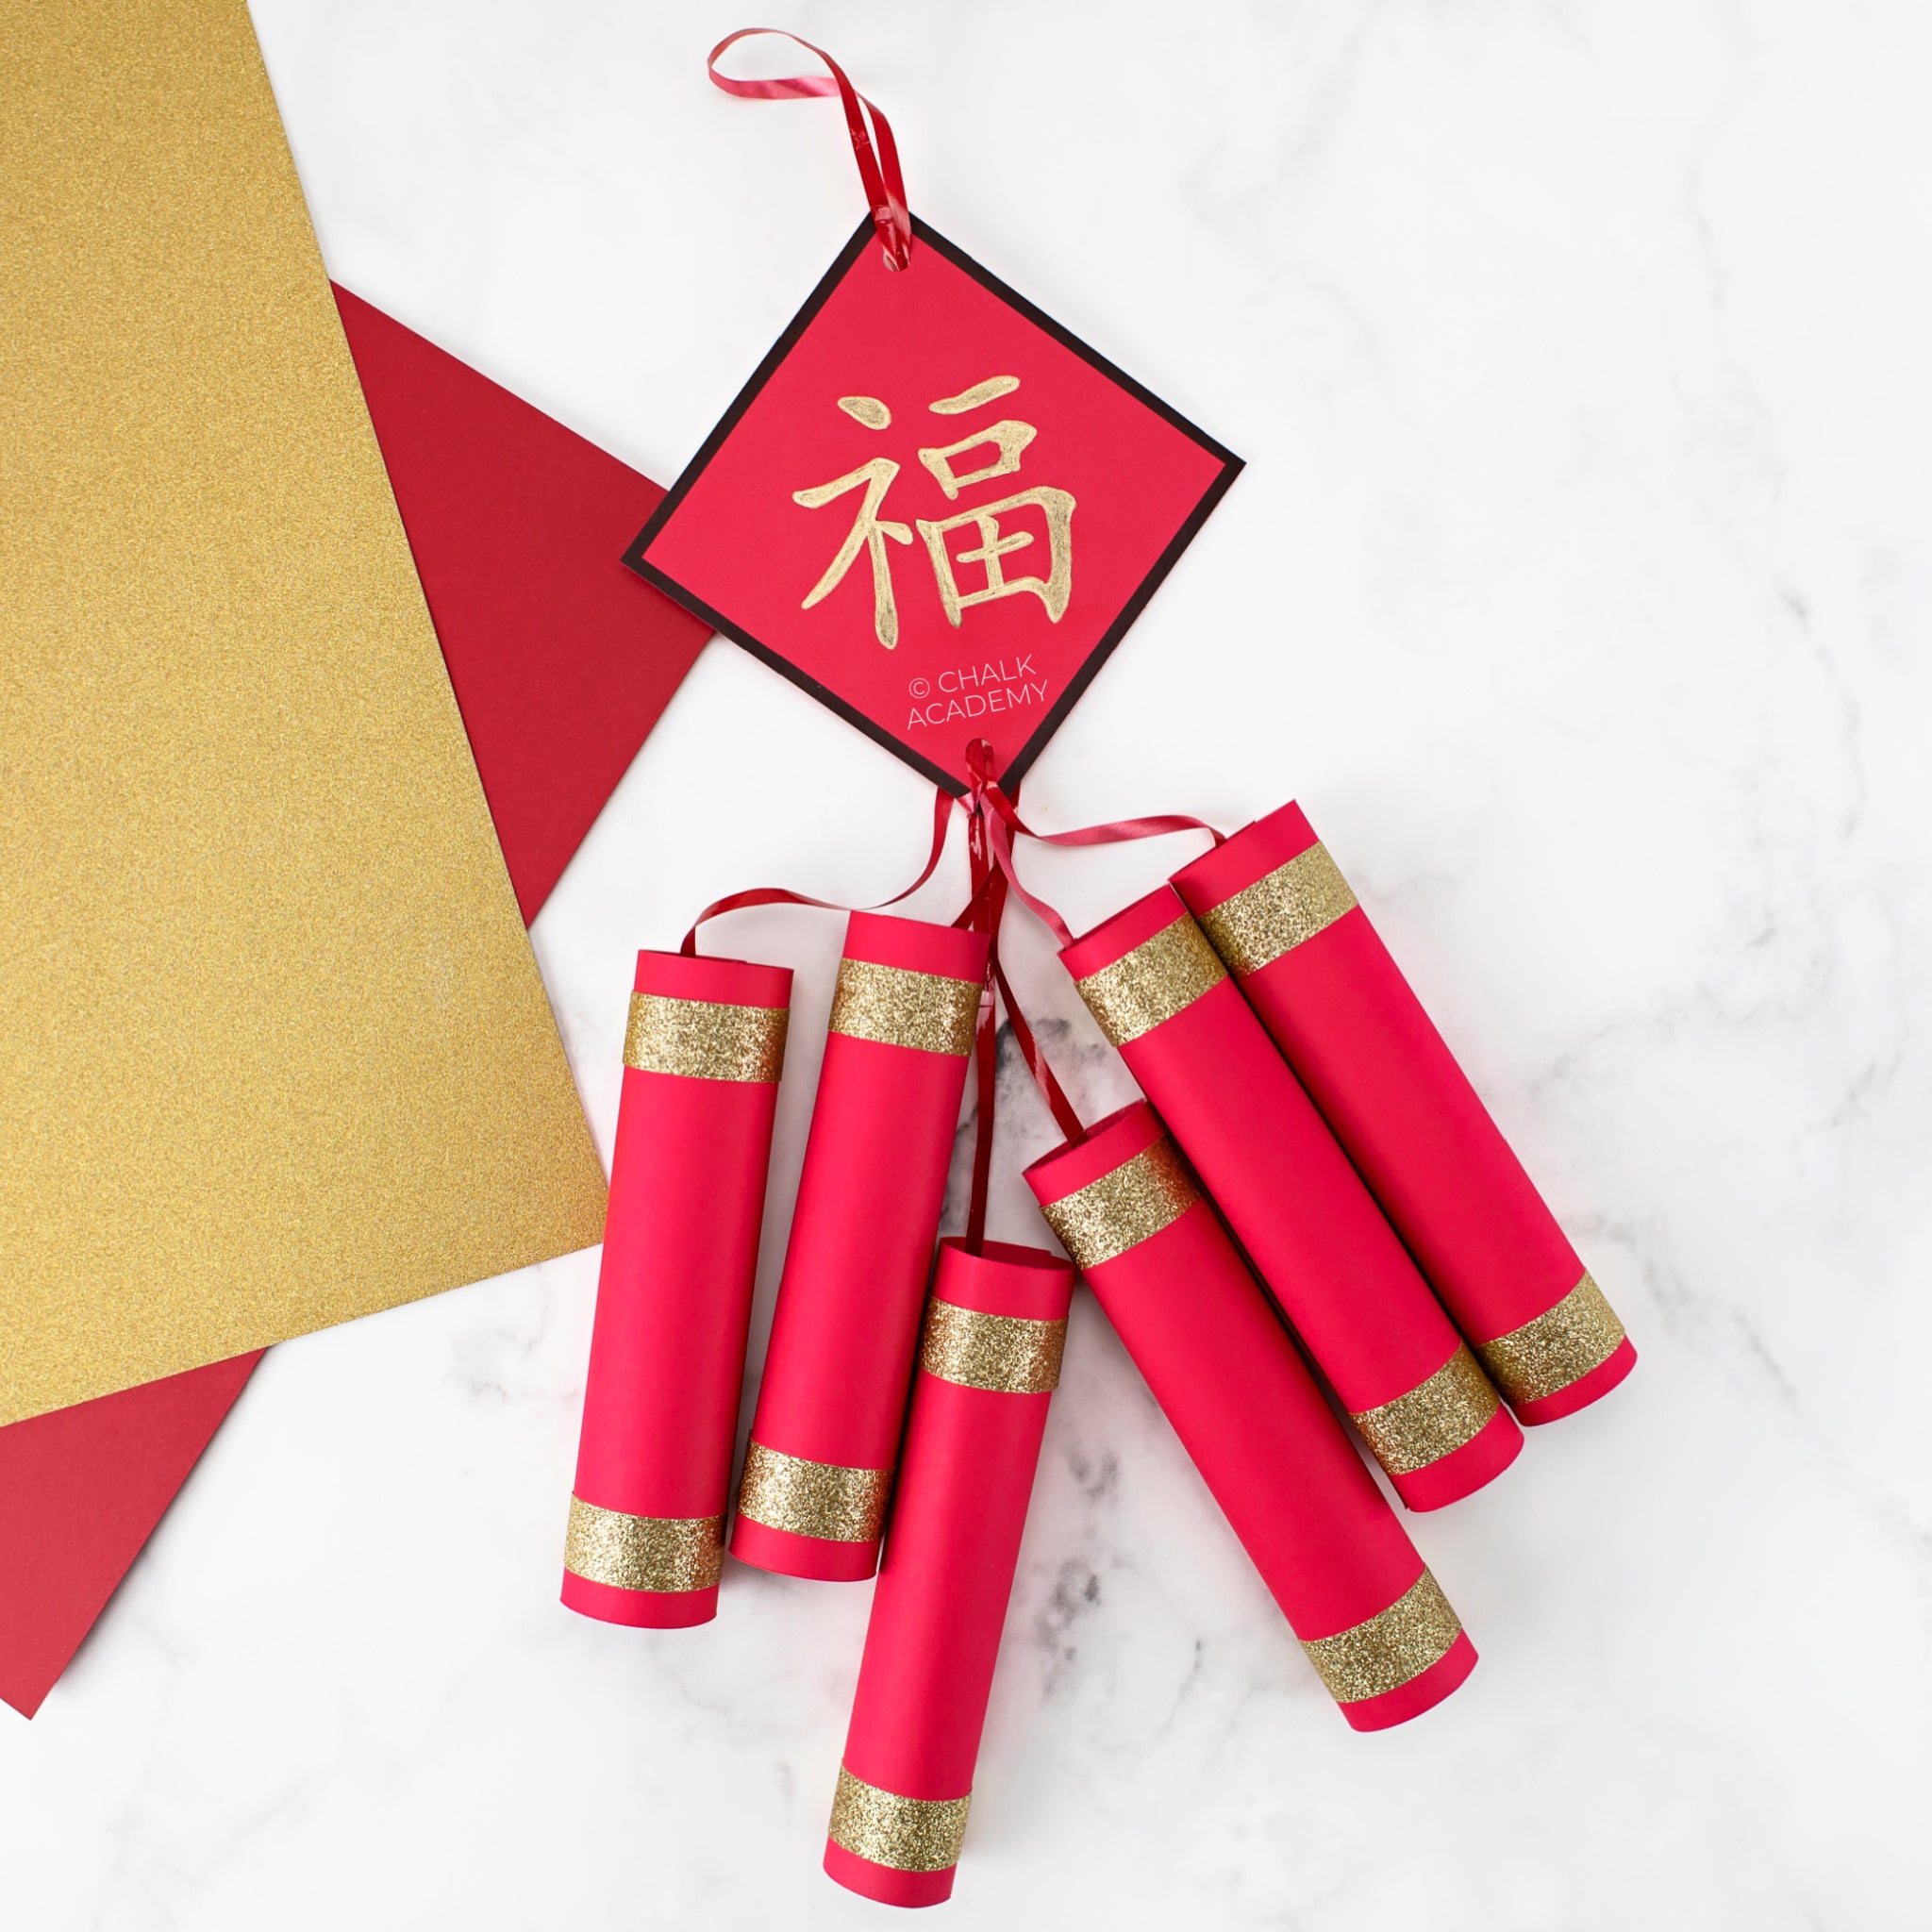 Chinese Firecrackers For The Chinese New Year's Decoration. Stock